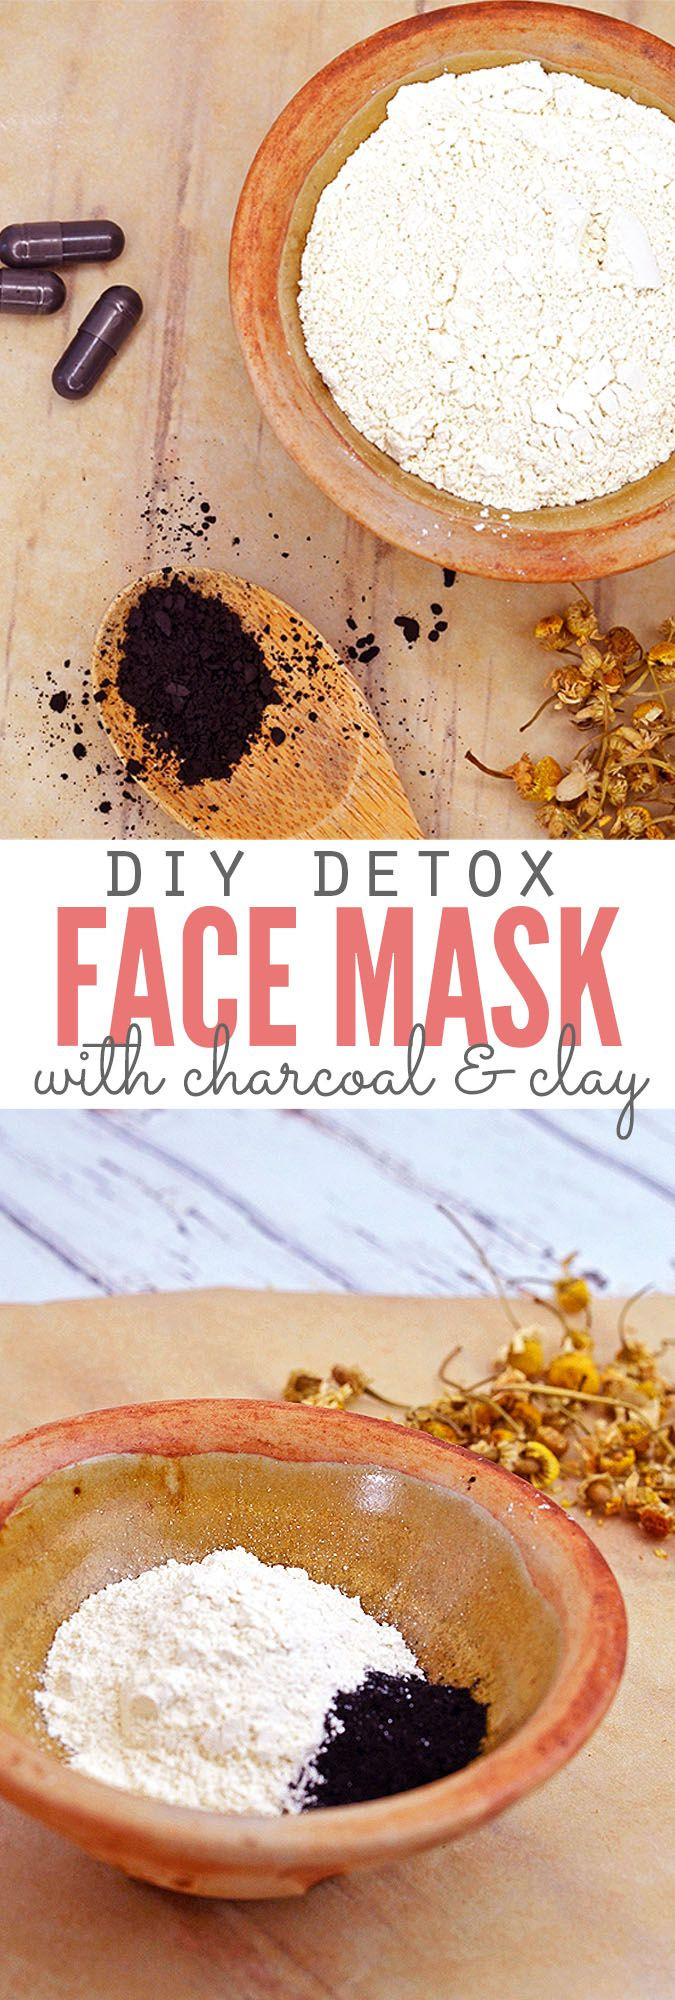 DIY Charcoal Mask Without Clay
 Simple DIY Detox Face Mask with Charcoal and Clay